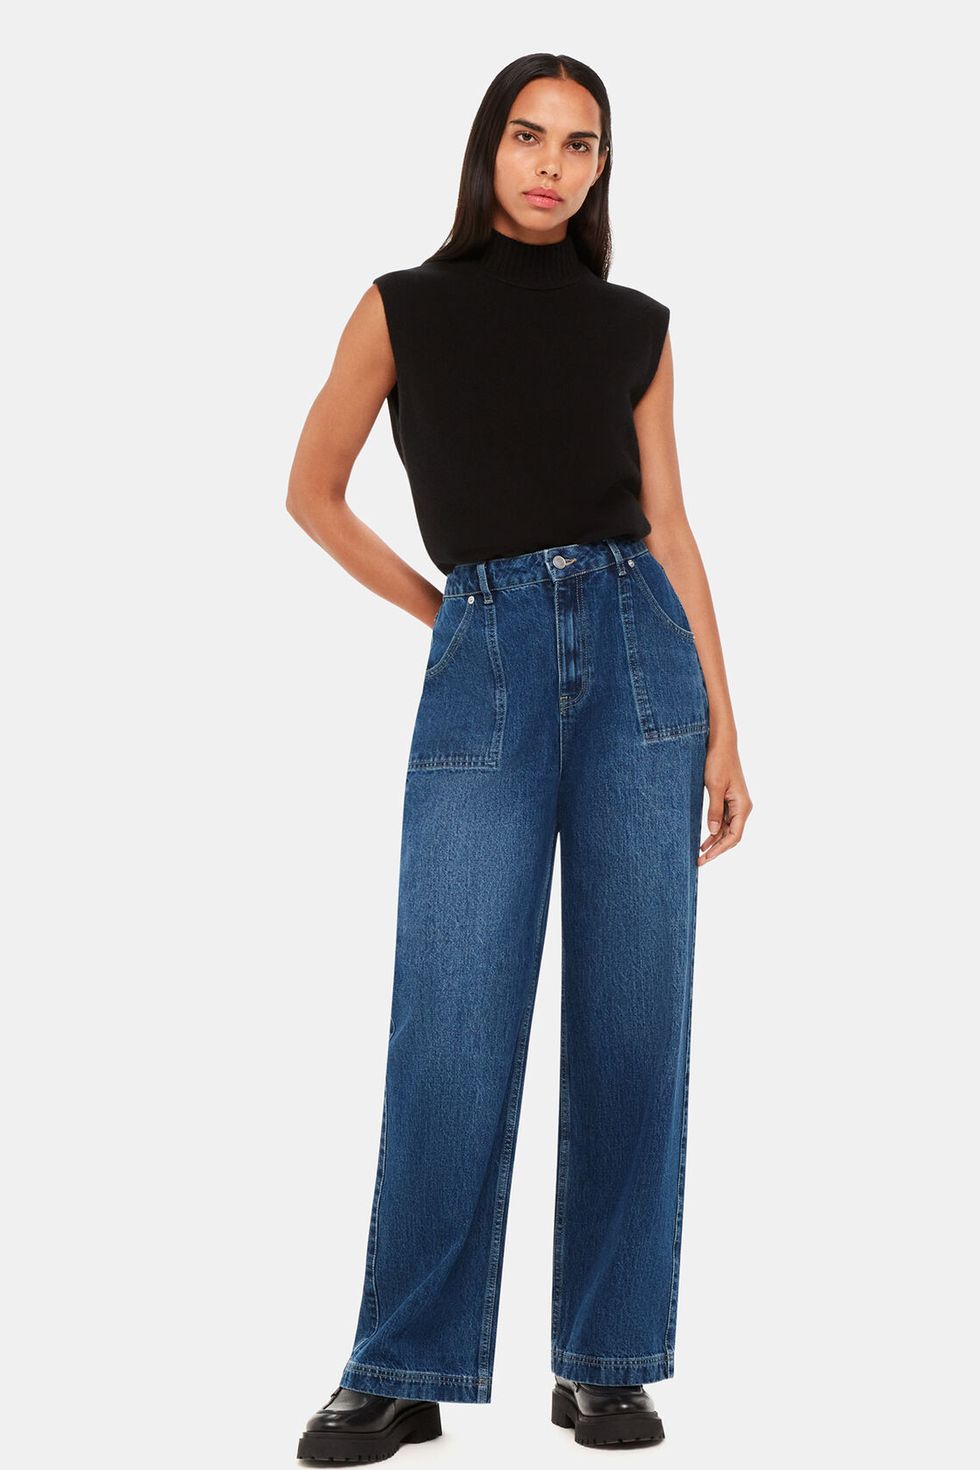 River Island mid rise flared jeans in medium blue